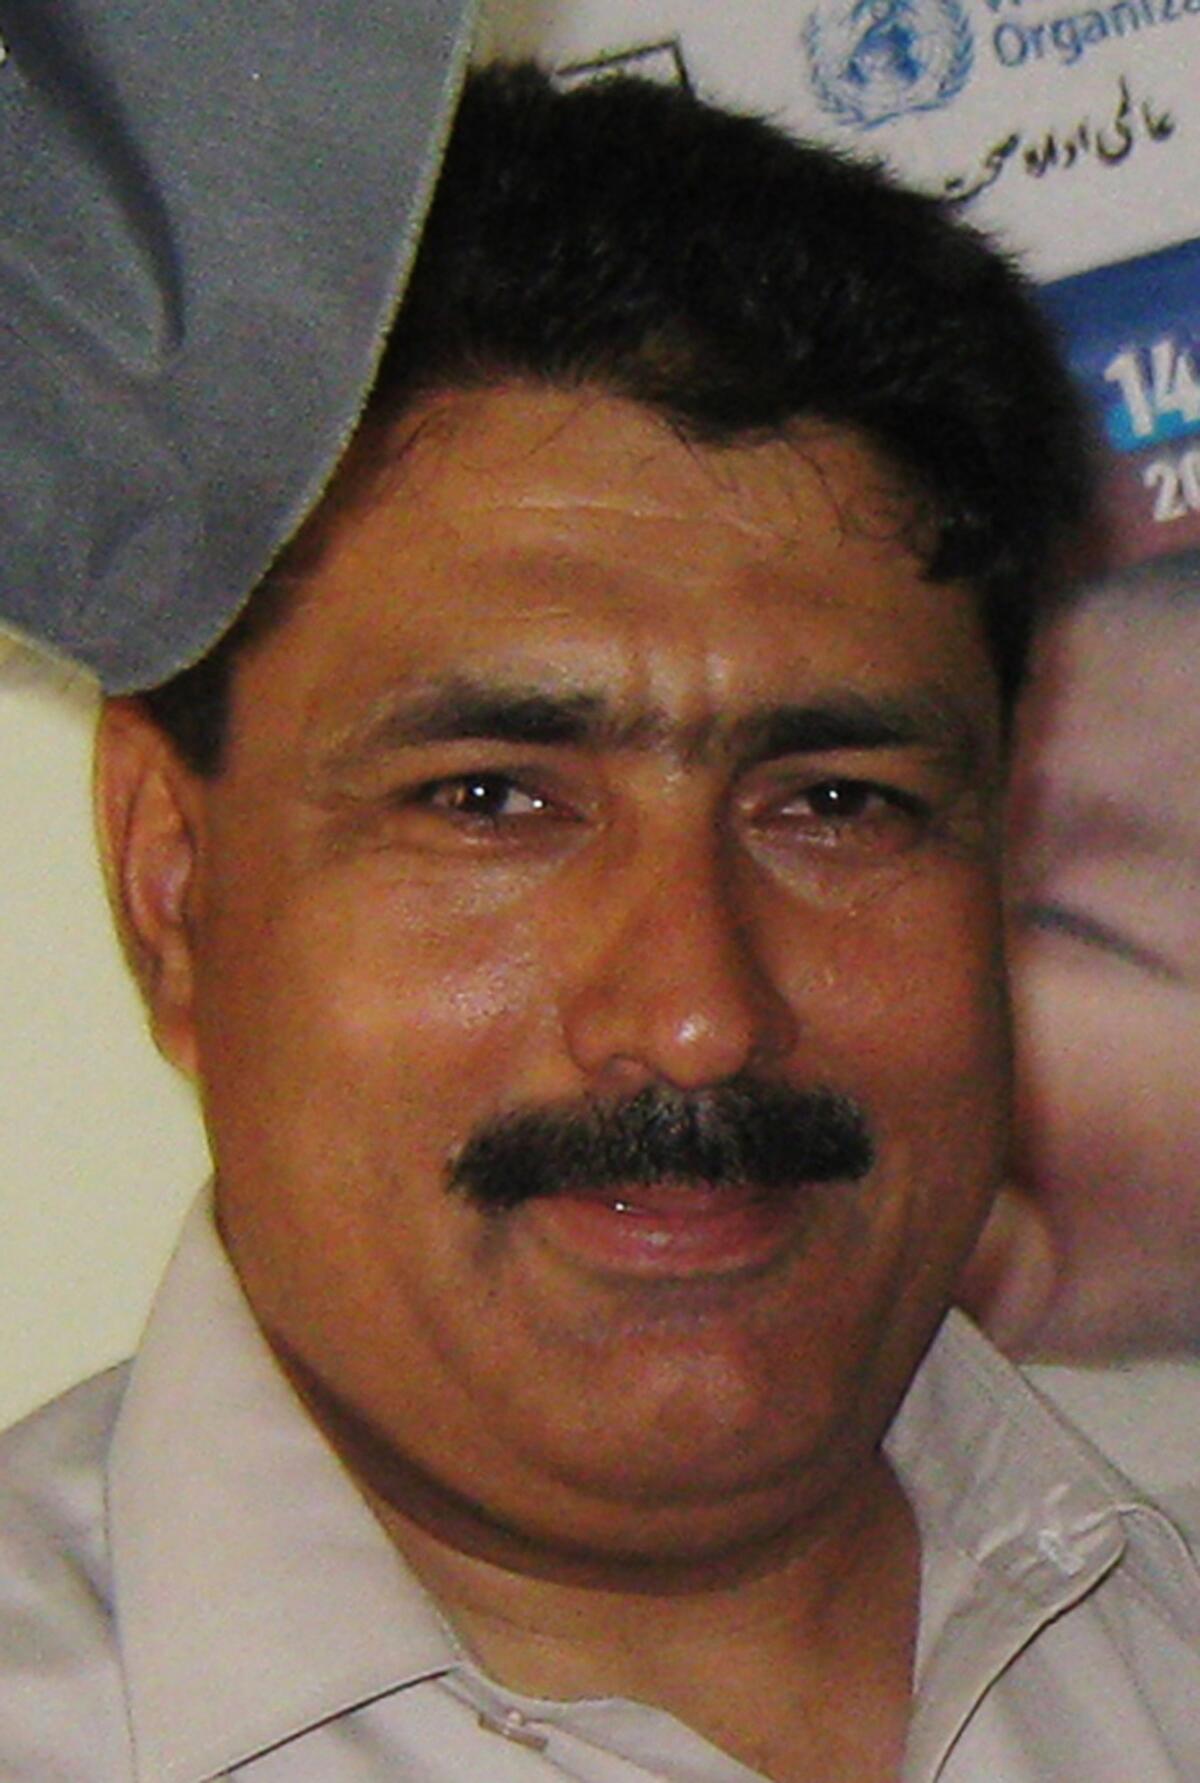 In this July 9, 2010, file photo, Pakistani doctor Shakil Afridi is photographed in Pakistan's tribal area of Jamrud in the Khyber region.